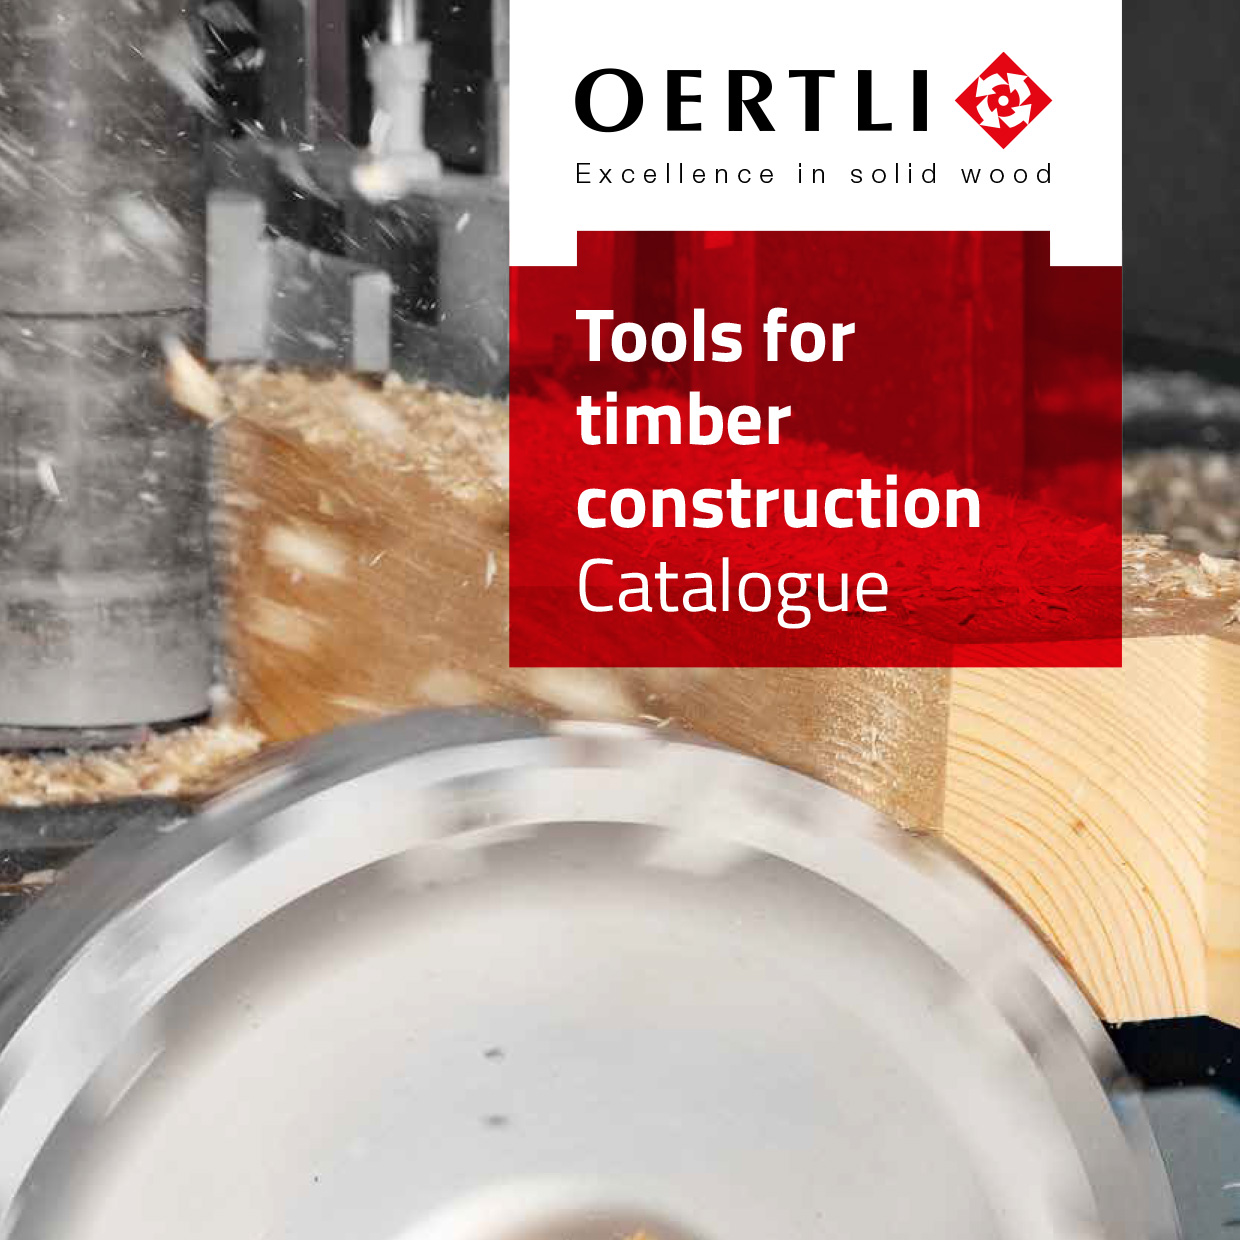 OERTLI tools for professional timber construction